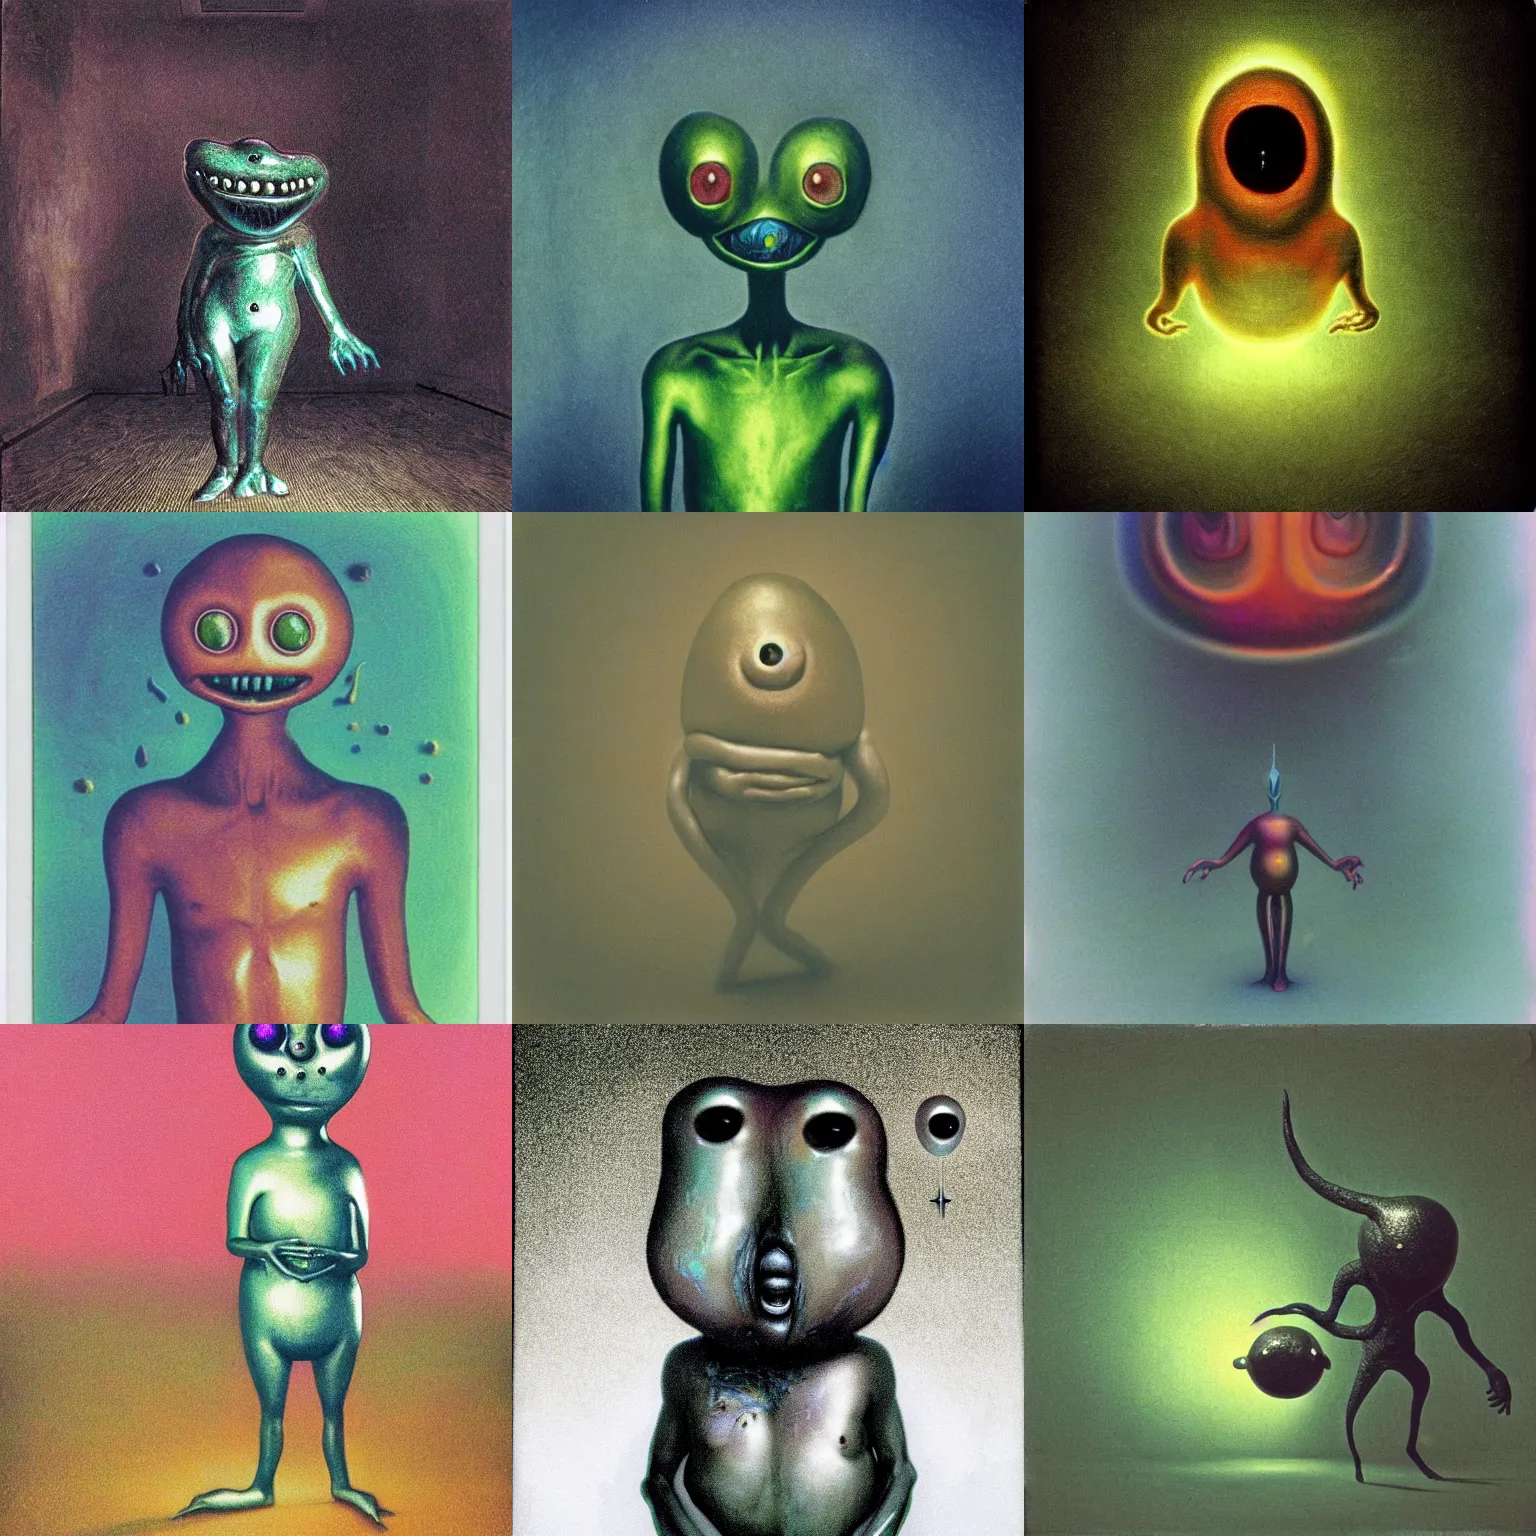 Prompt: glowing metallic blobby guy creature, weird silly thing with big eyes, prancing around in an empty room. goofy smile face, stupid idiot cryptid, spiritual eerie creepy picture, zdislaw beksinski, wiggly ethereal being, surreal animal, leonora carrington, liminal space, studio lighting, polaroid, pastel colours, grainy photograph